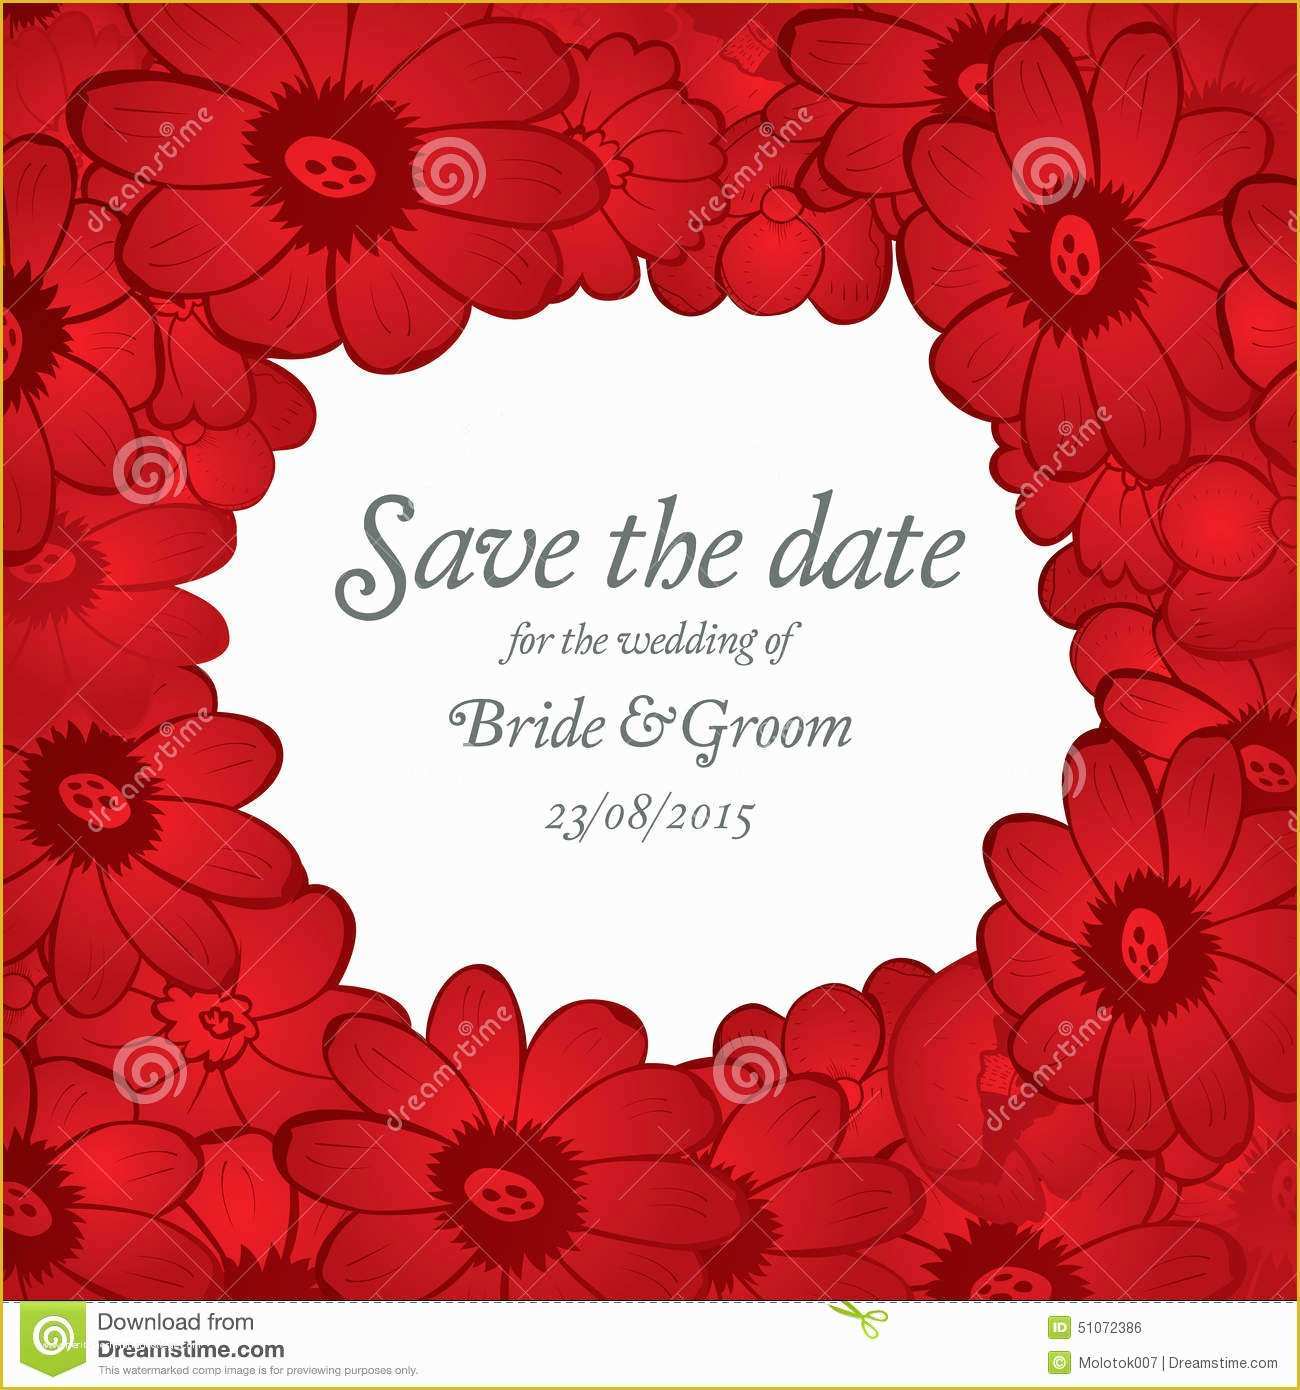 Free Save the Date Holiday Party Templates Of Save the Date Holiday Party Templates Free